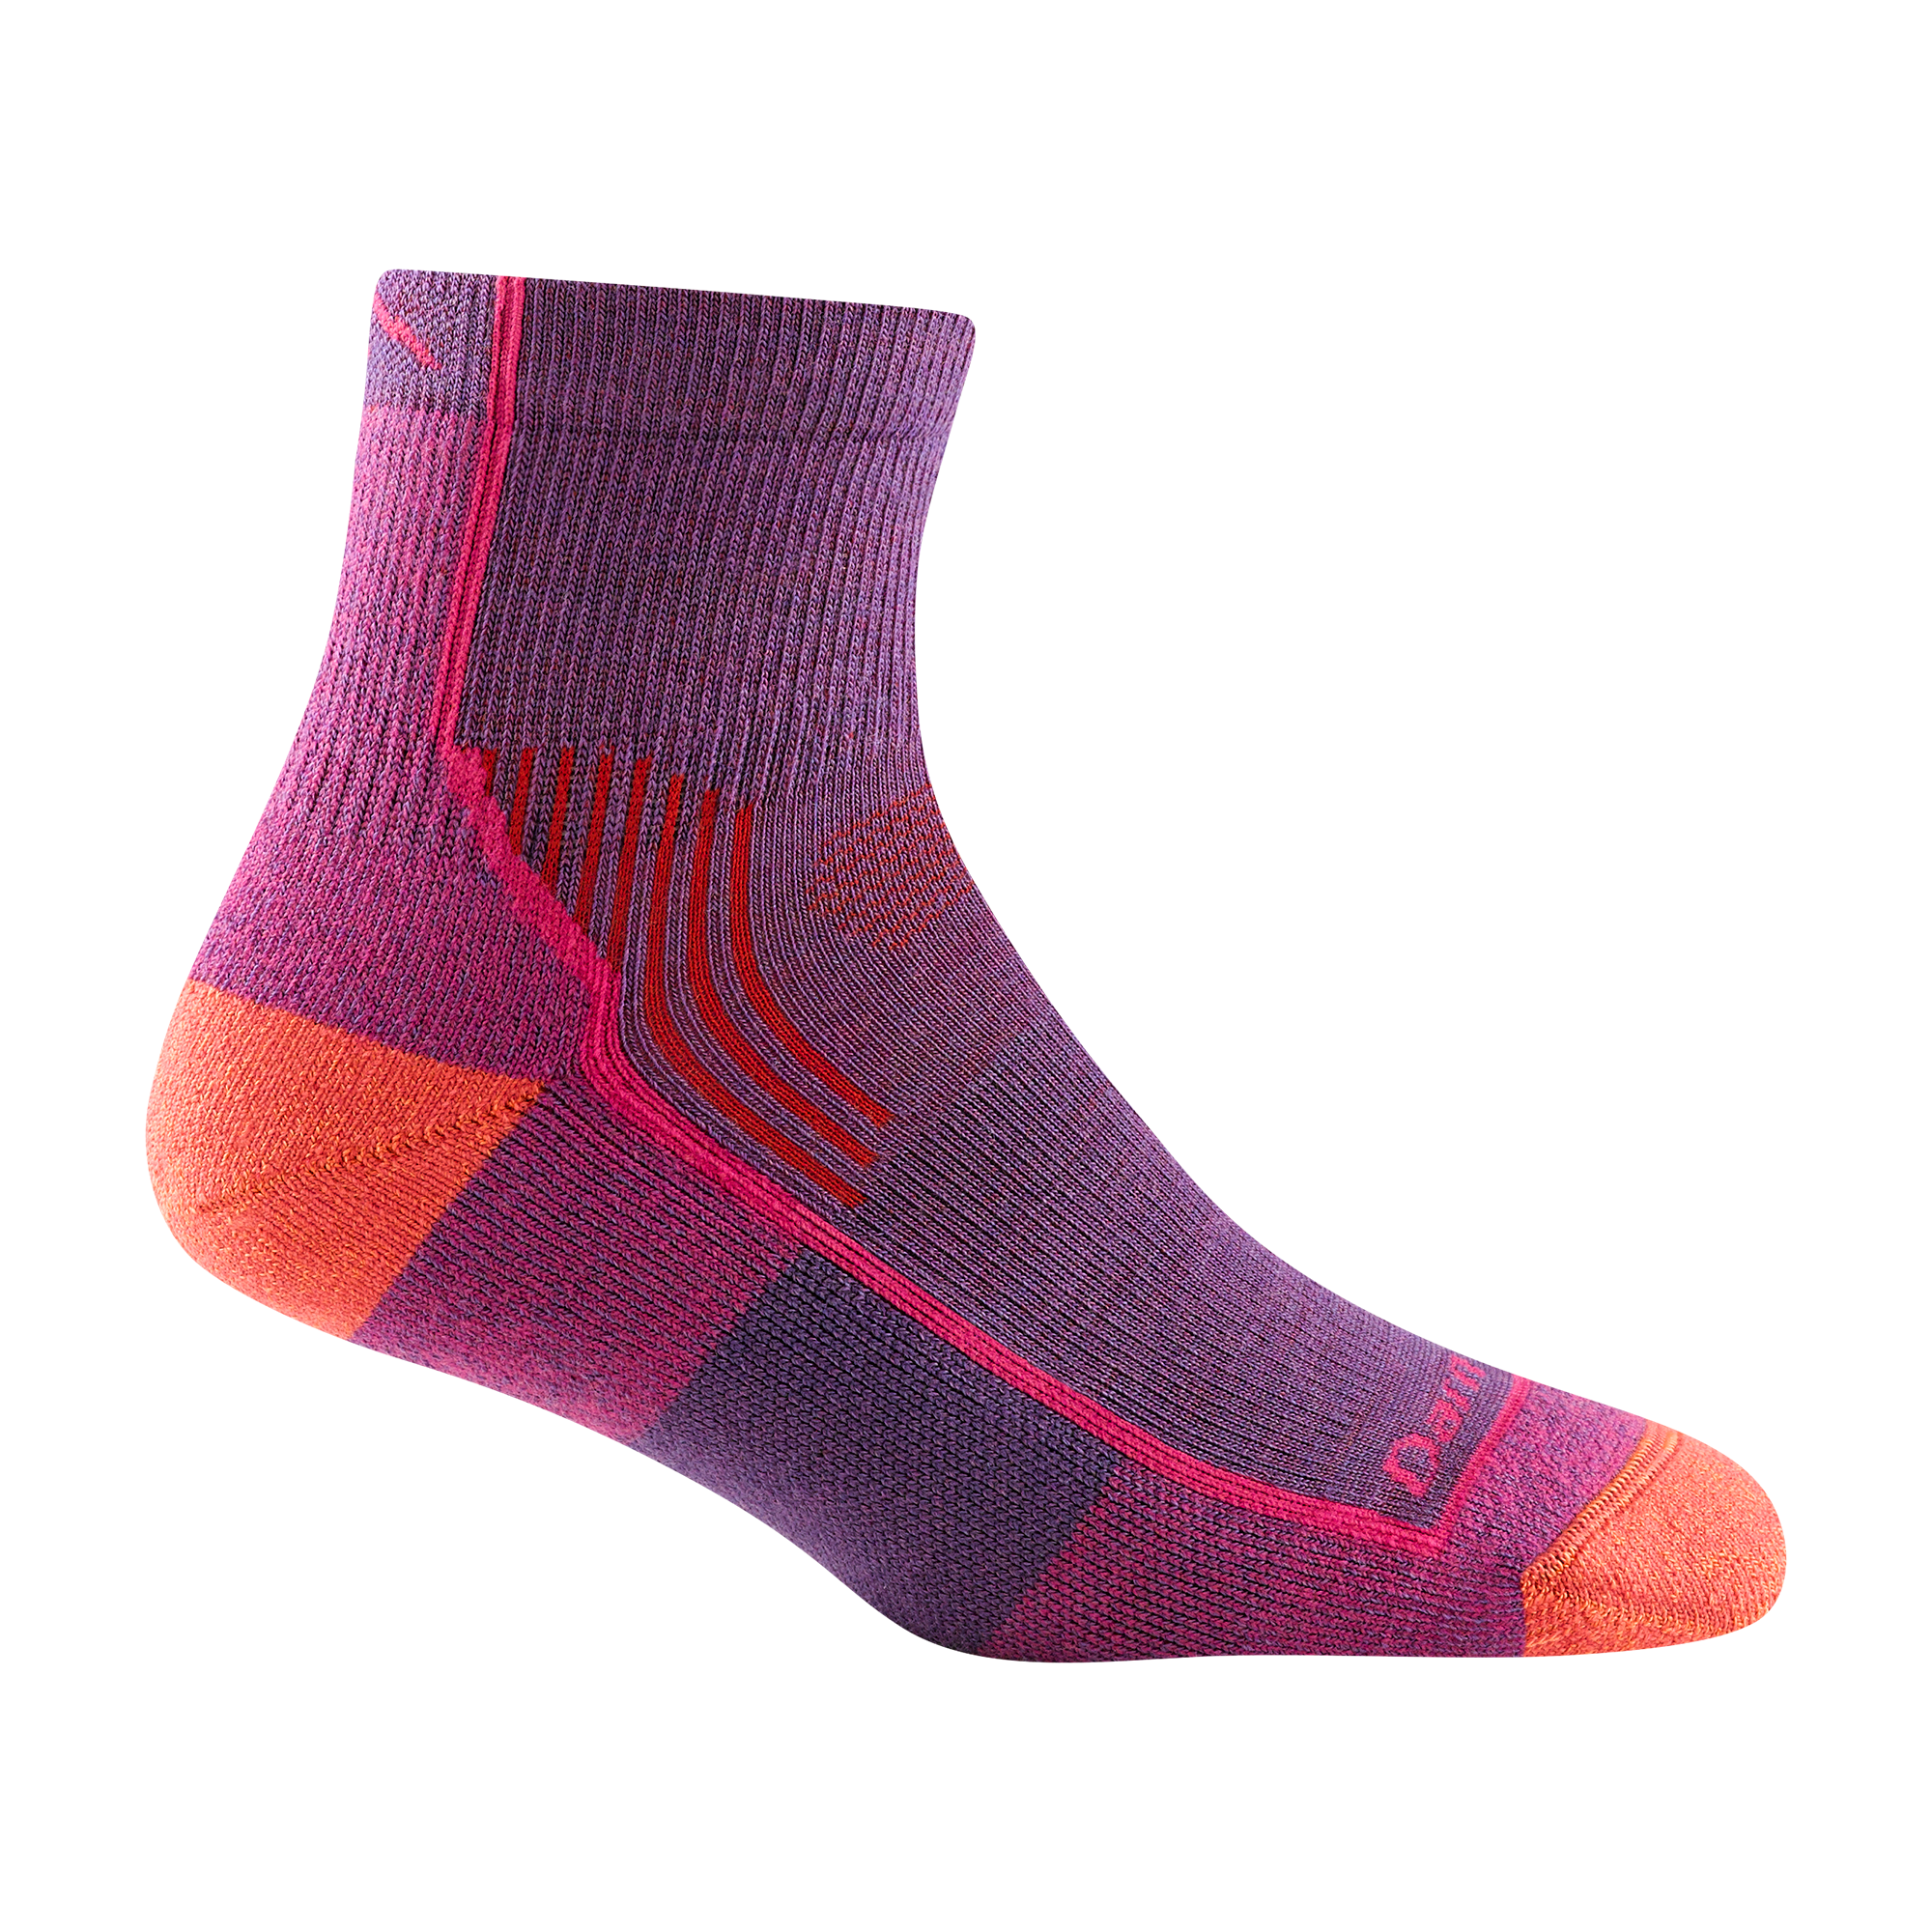 1958 women's quarter hiking sock in color berry purple with coral toe/heel accents and pink forefoot outline